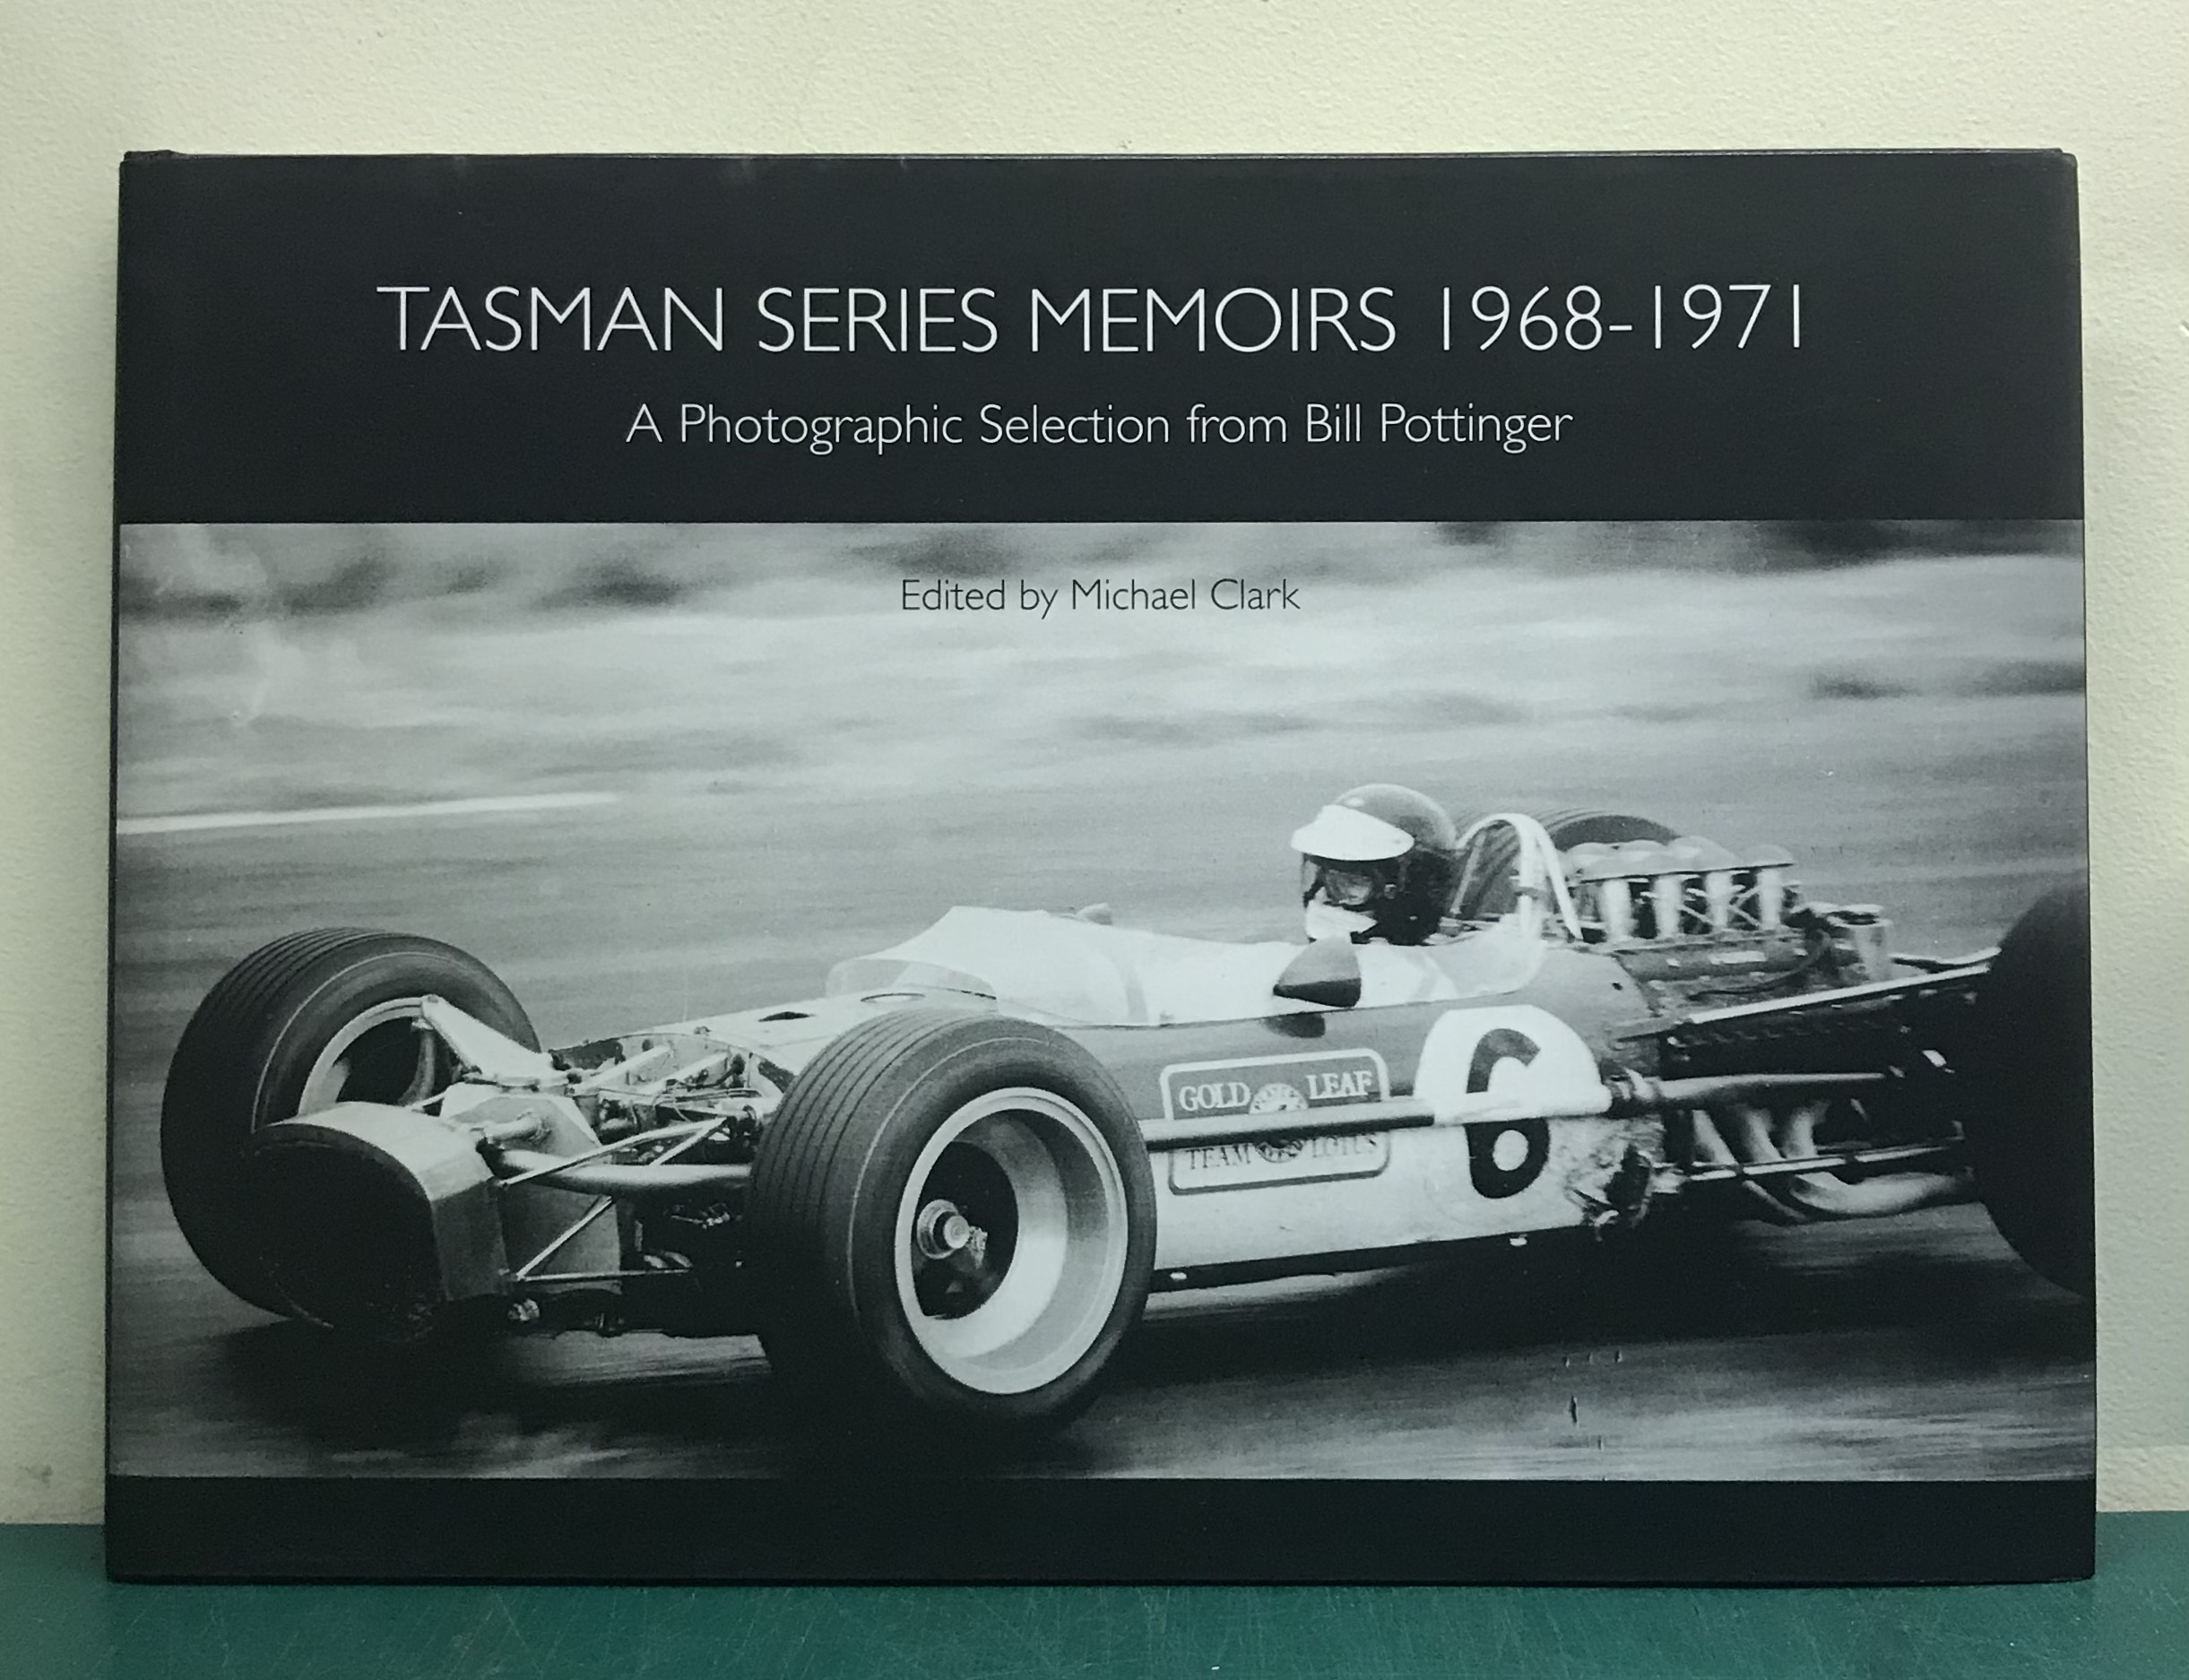 Tasman Series Memoirs 1968 - 1971. A Photographic Selection from Bill Pottinger